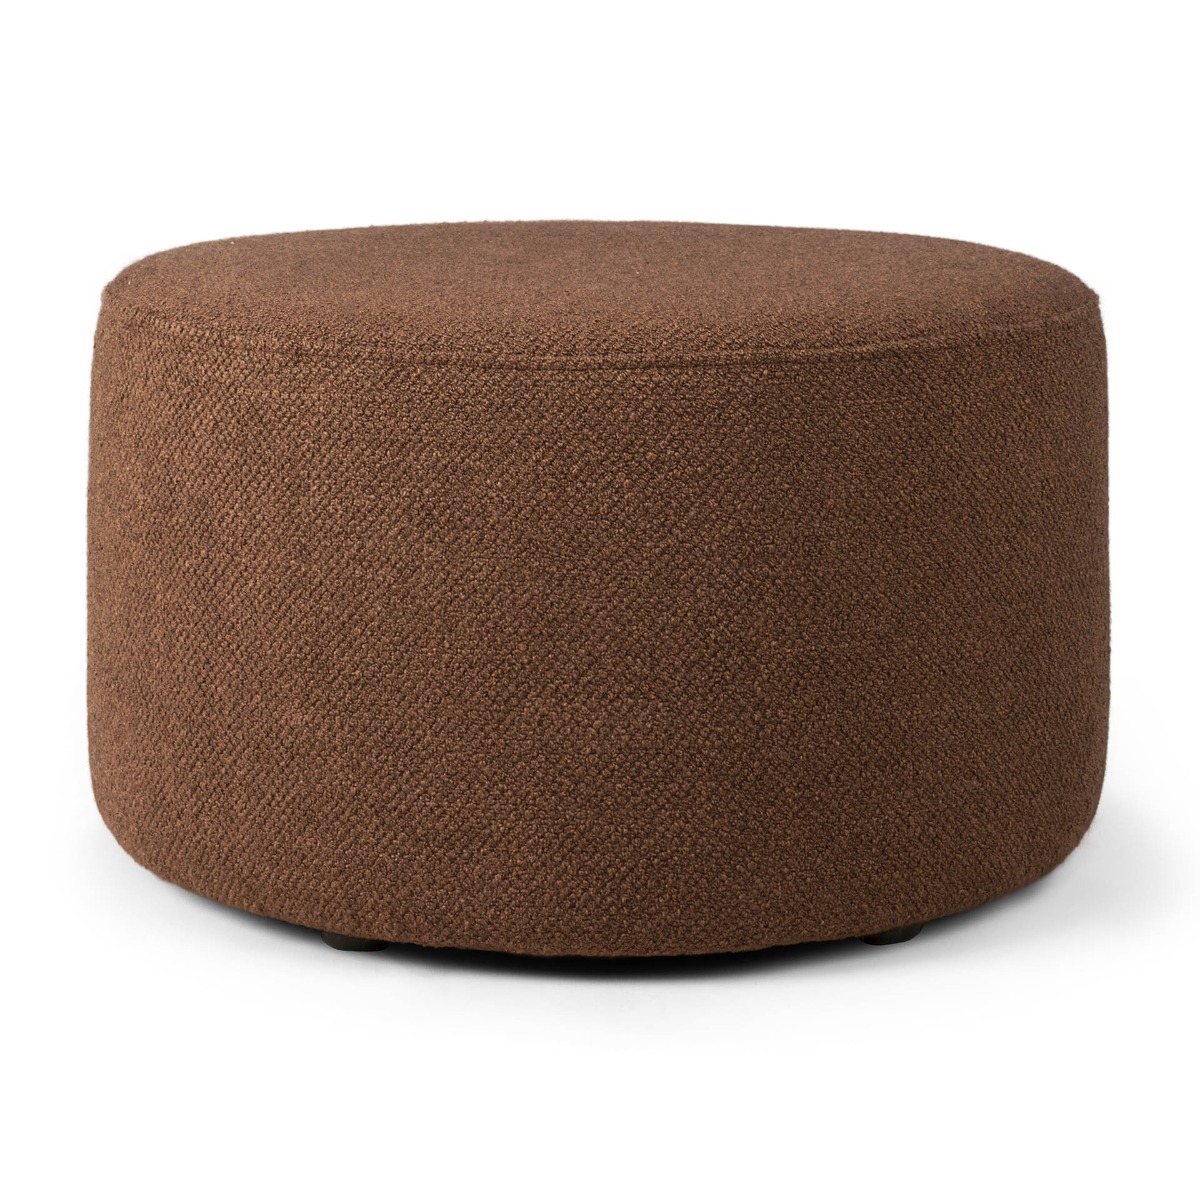 Barrow footstool Round in Copper